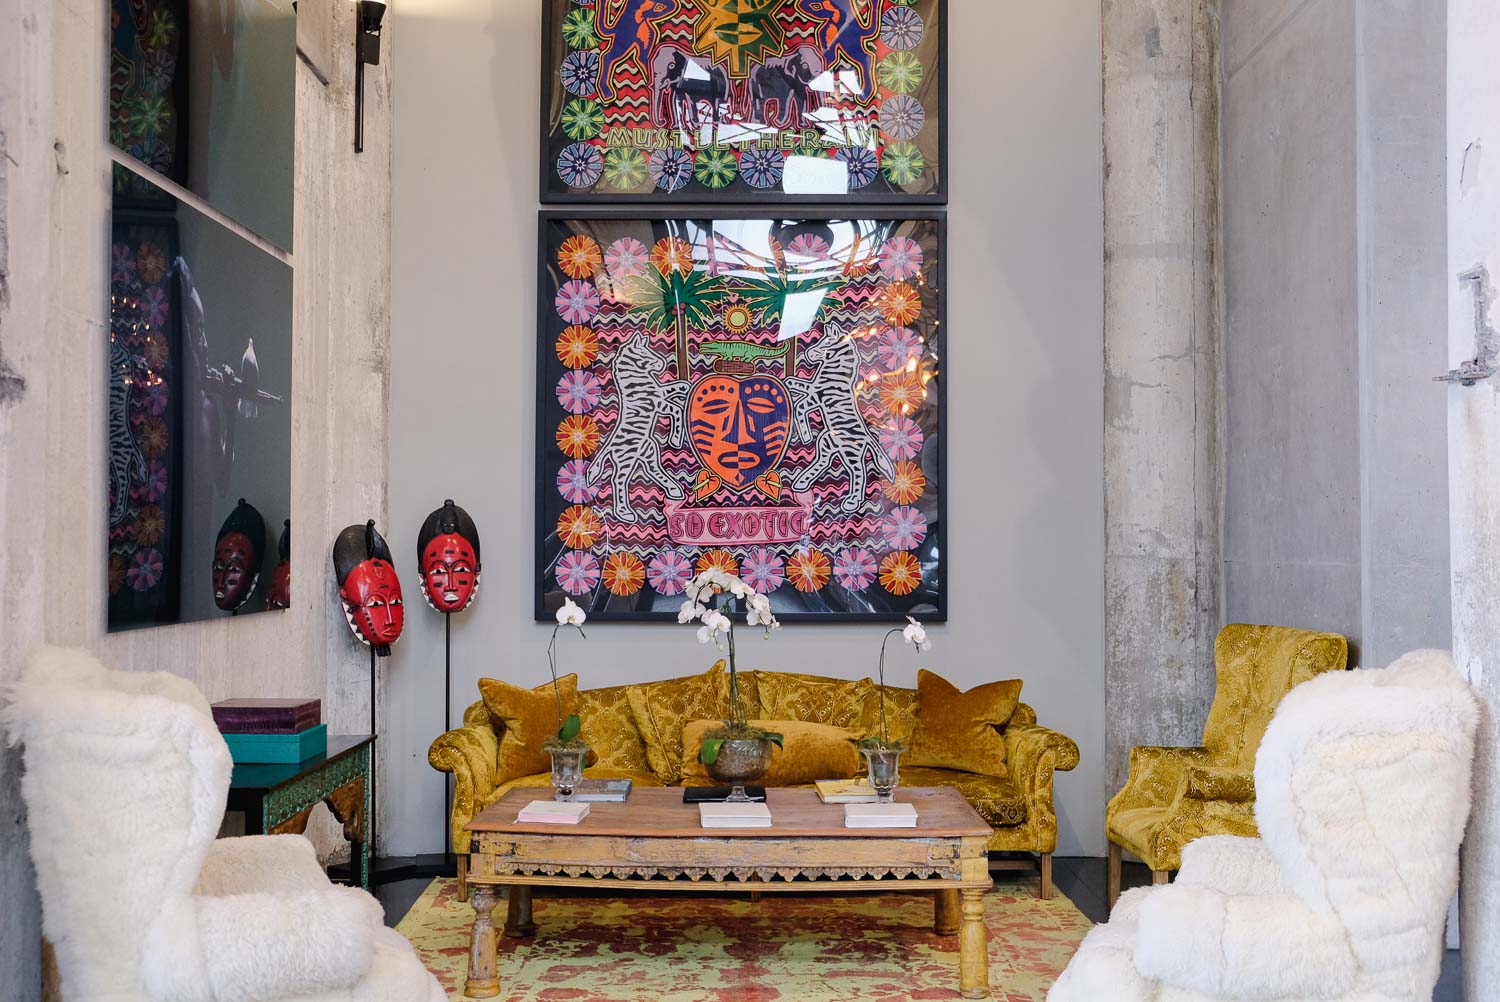 The Silo Upon entry one is greeted with the powerful repurposed The Silo walls, a splash of textures and colors in the interior and a strong art collection